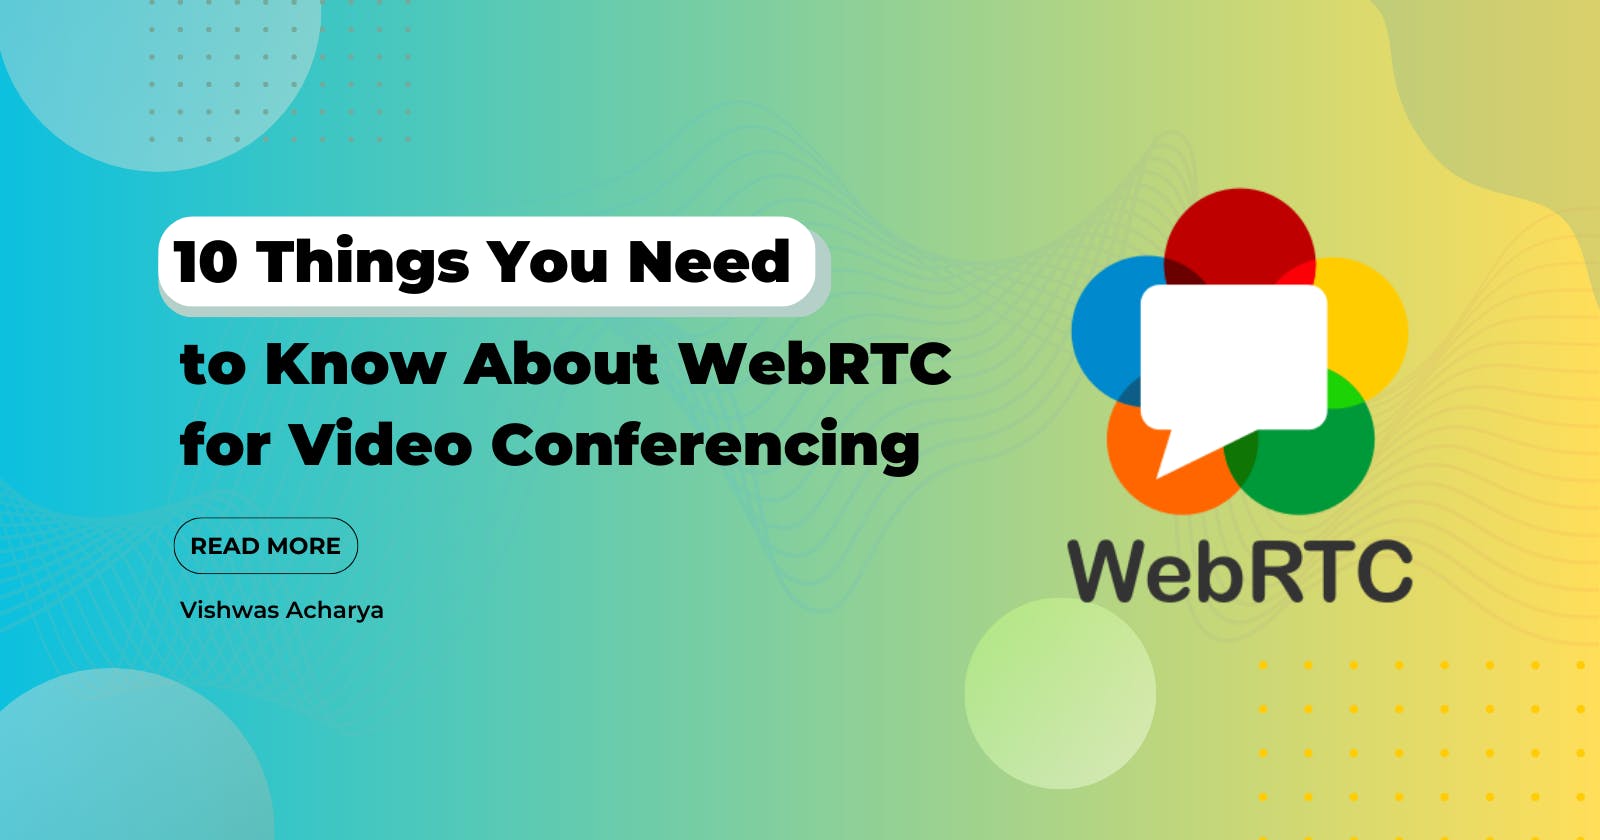 10 Things You Need to Know About WebRTC for Video Conferencing